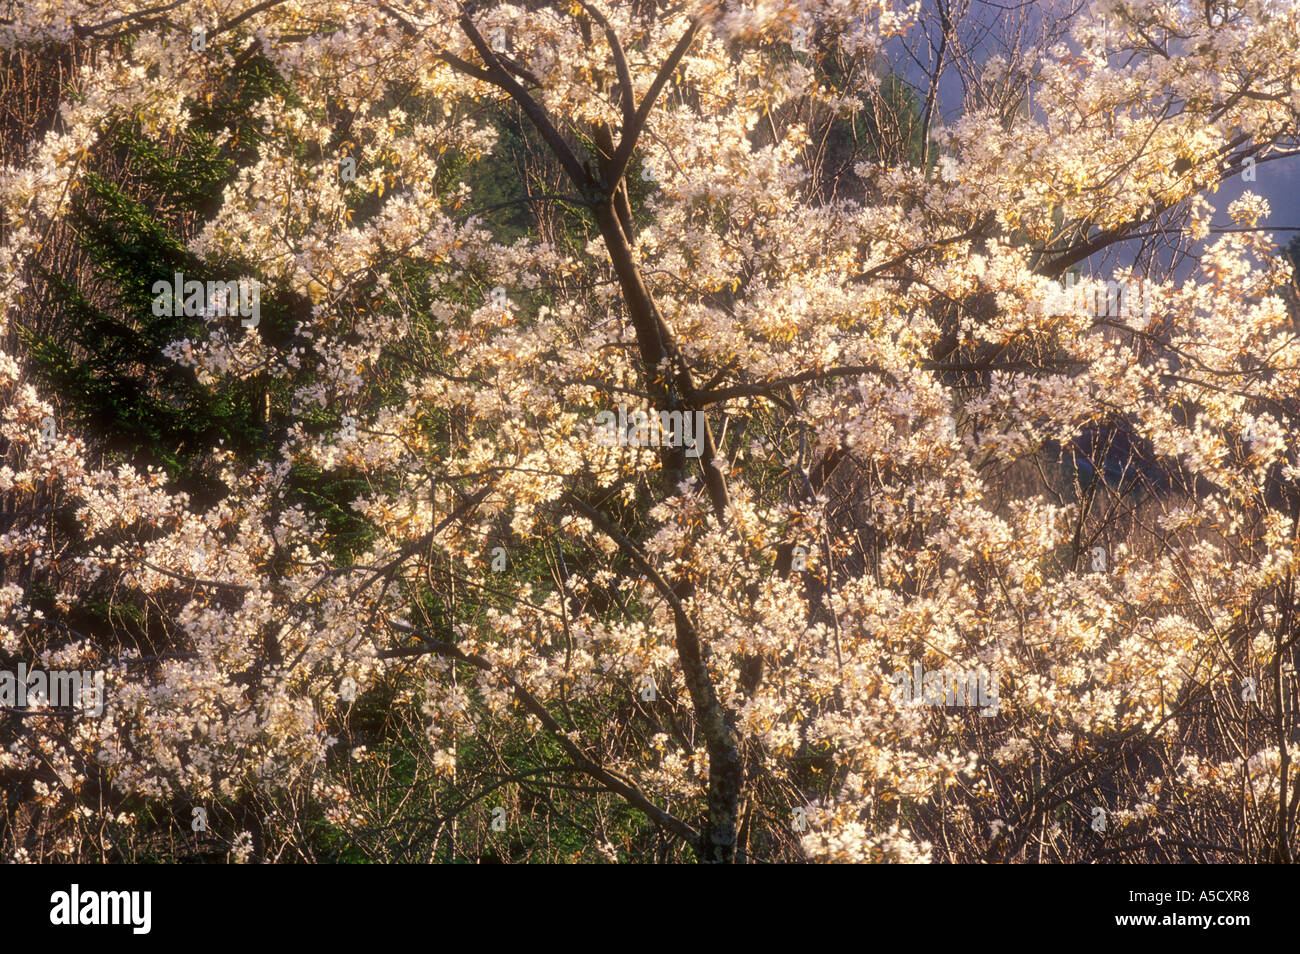 Fire Cherry Flowering tree near Morton's Overlook, Great Smoky Mountains National Park, Tennessee, USA Stock Photo